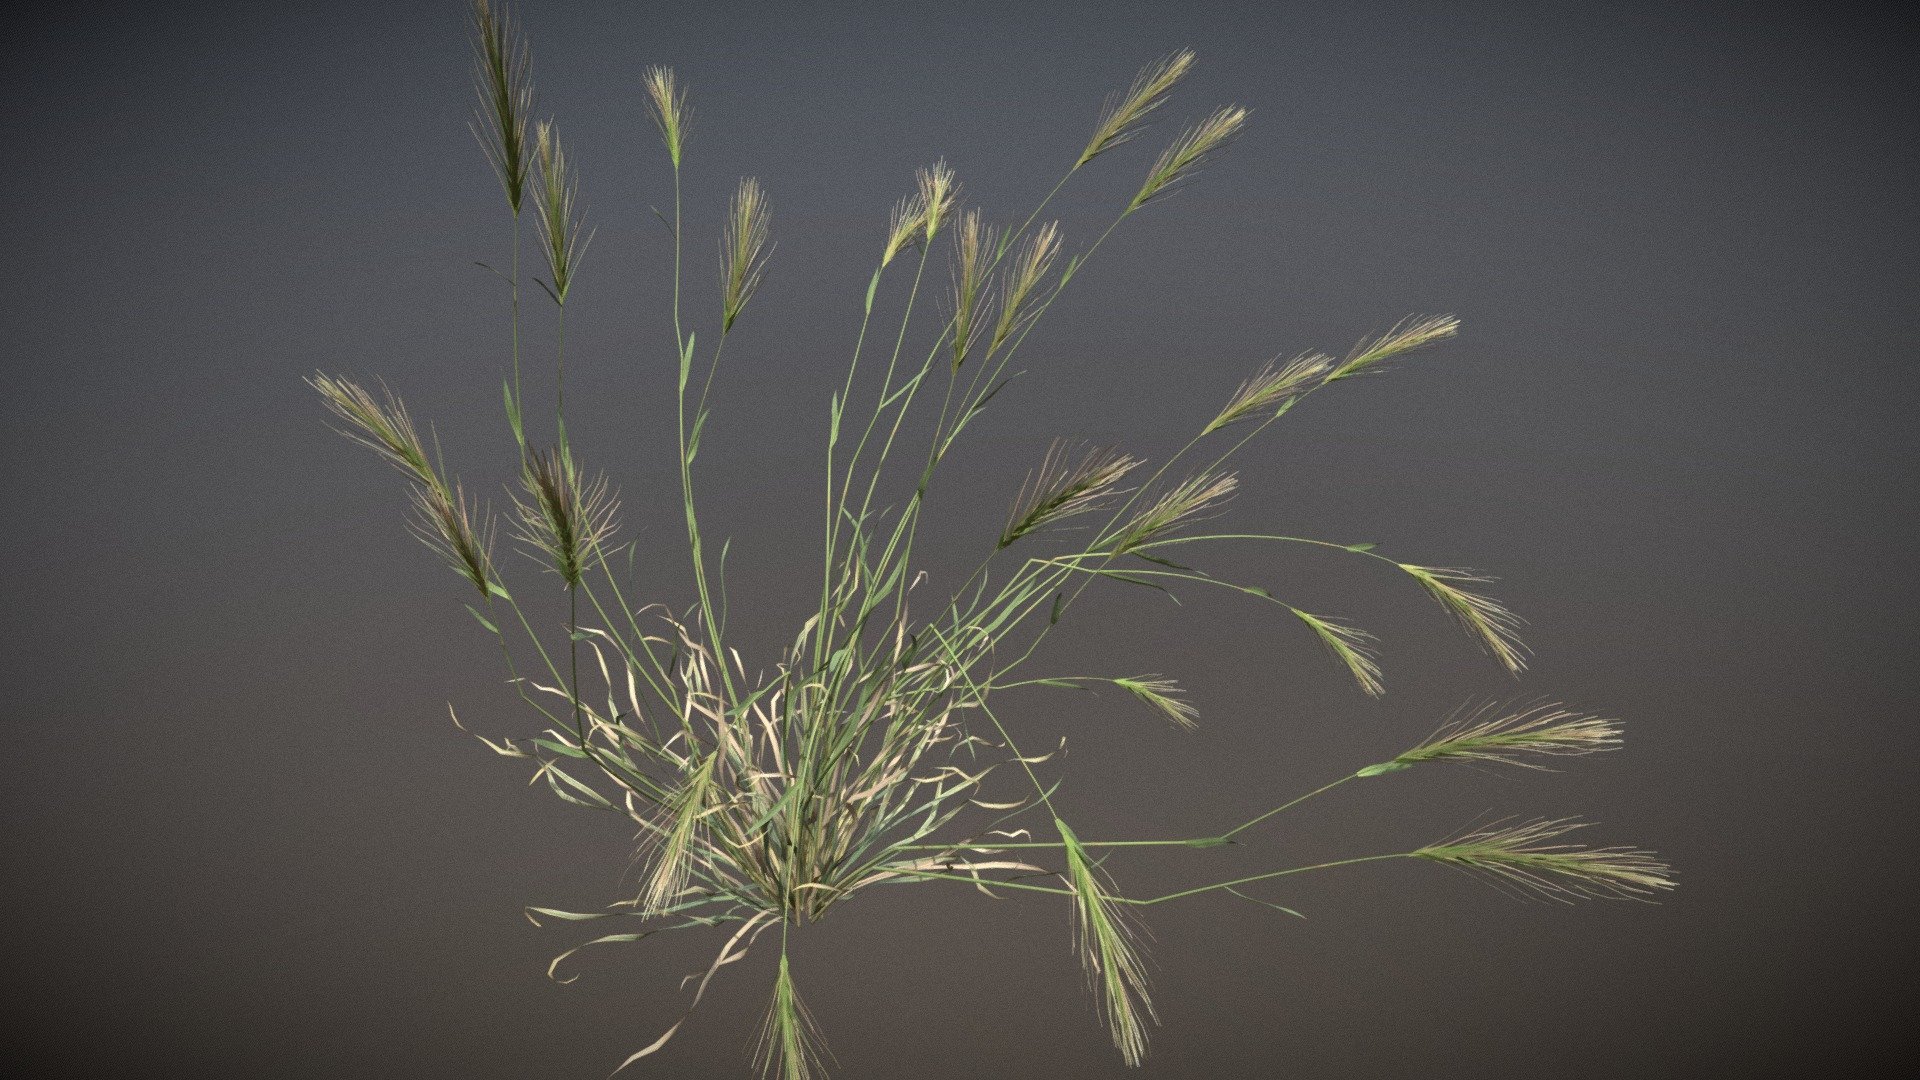 Hordeum Murinum 
Hordeum murinum, commonly known as wall barley or false barley, is a species of grass 3d model